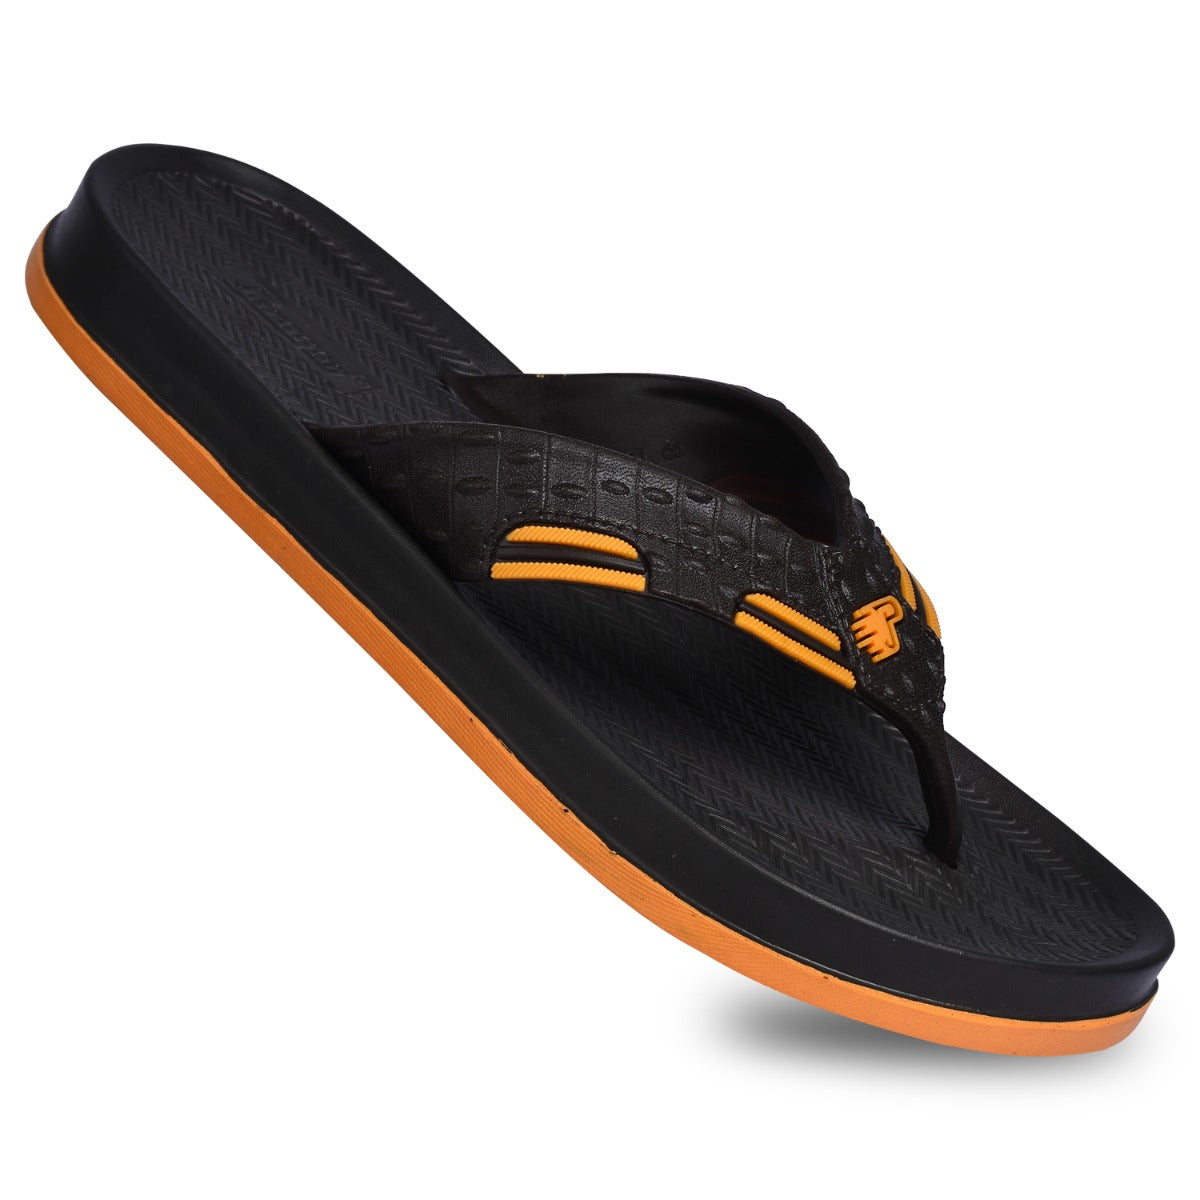 Paragon EVK3412G Men Stylish Lightweight Flipflops | Casual &amp; Comfortable Daily-wear Slippers for Indoor &amp; Outdoor | For Everyday Use